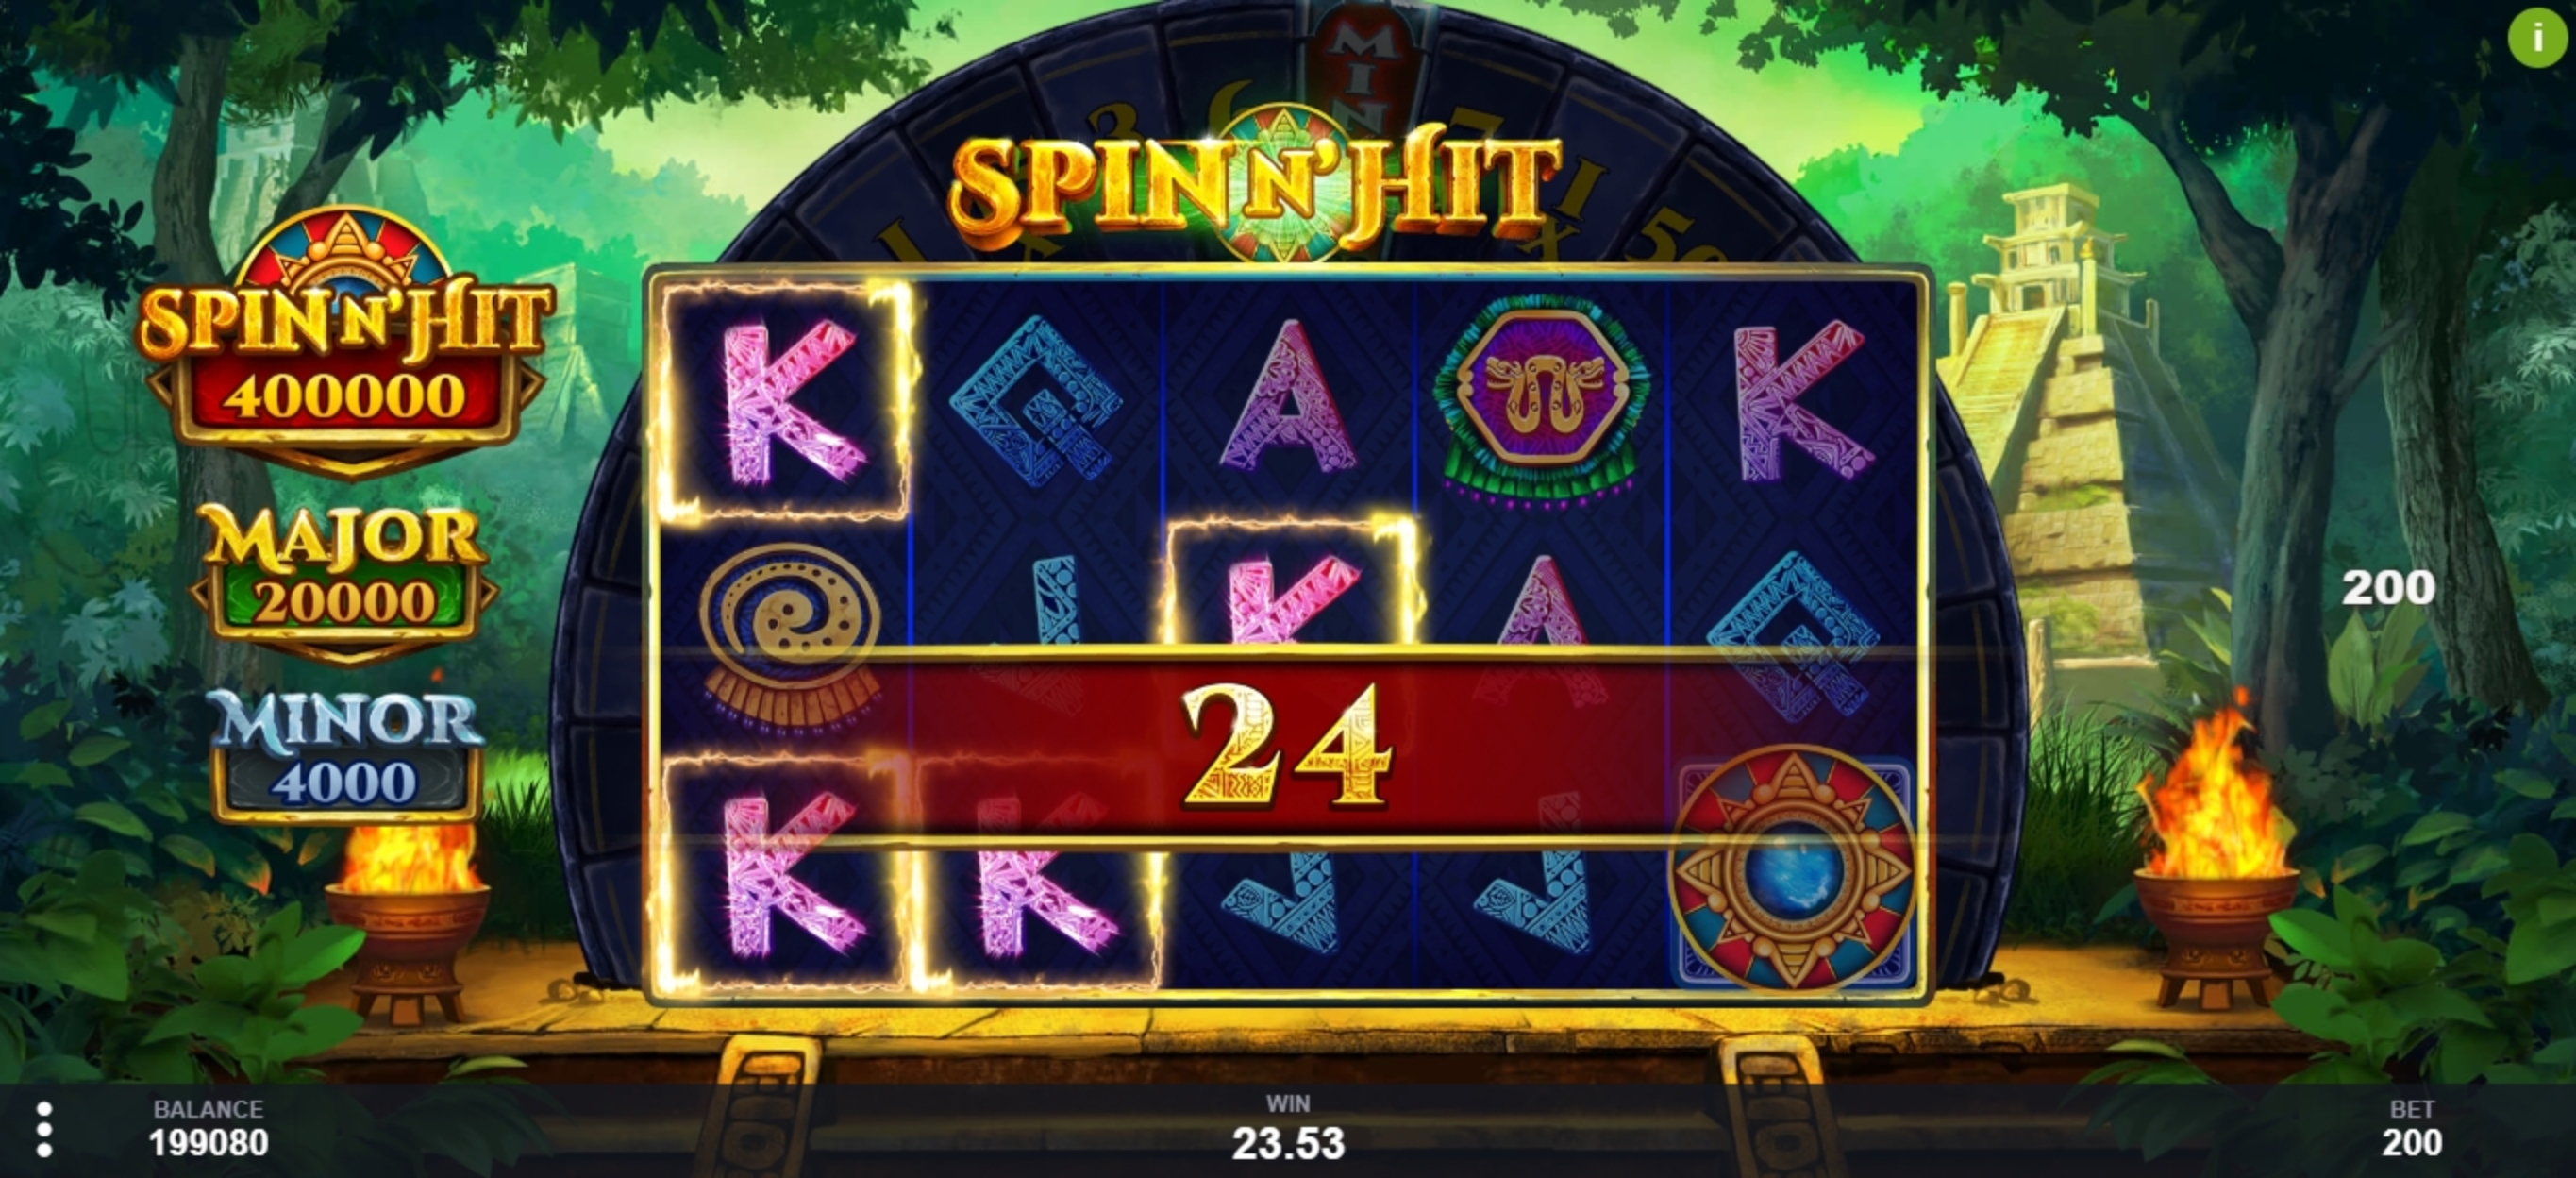 Win Money in Spin N Hit Free Slot Game by PariPlay